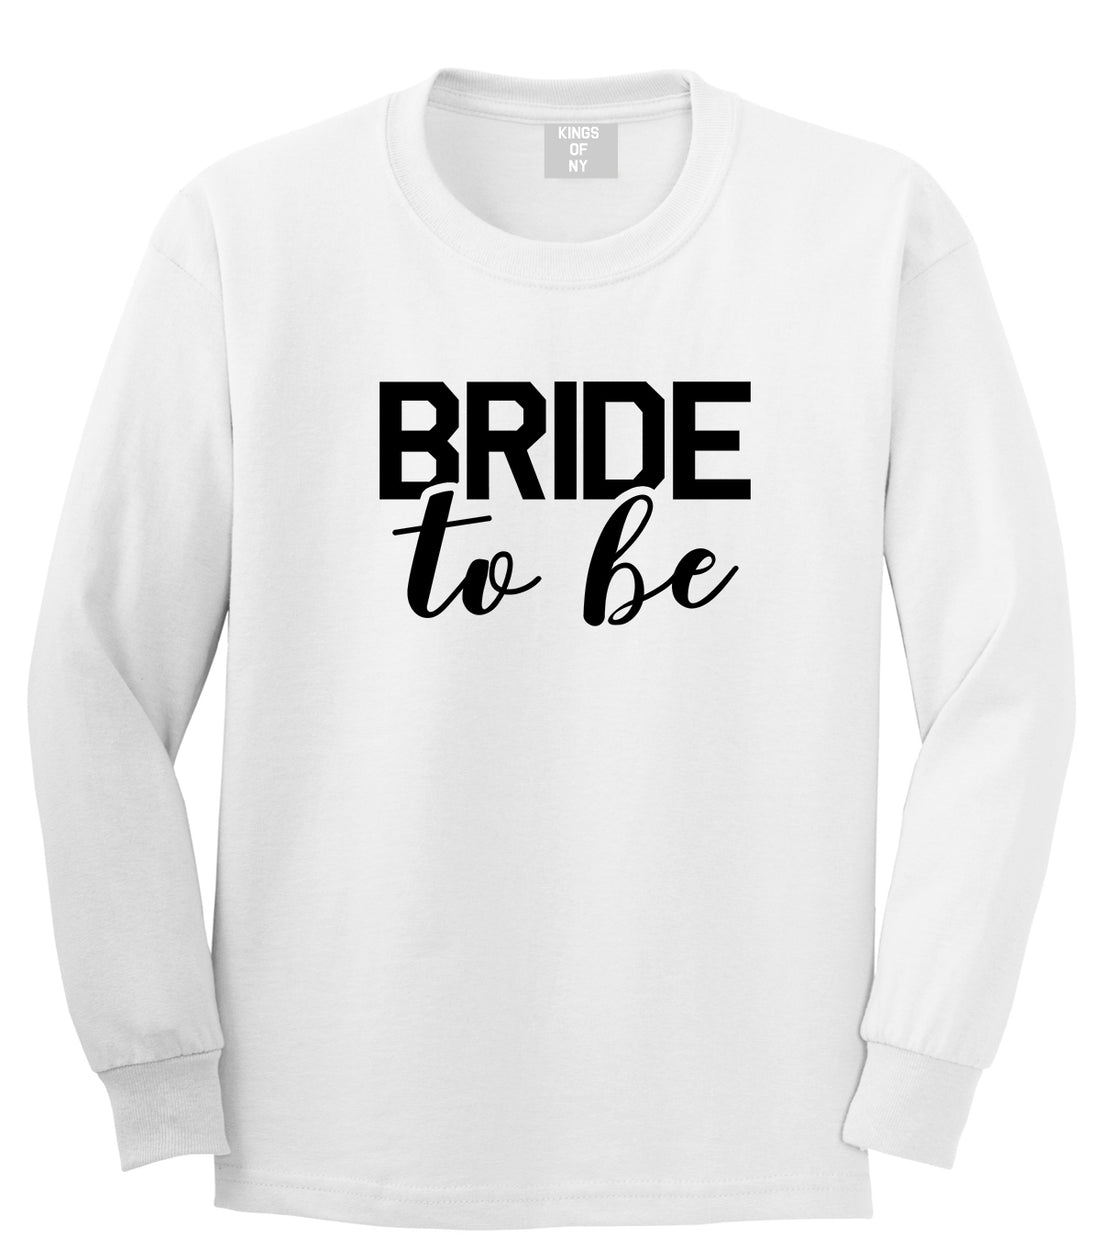 Bride To Be White Long Sleeve T-Shirt by Kings Of NY